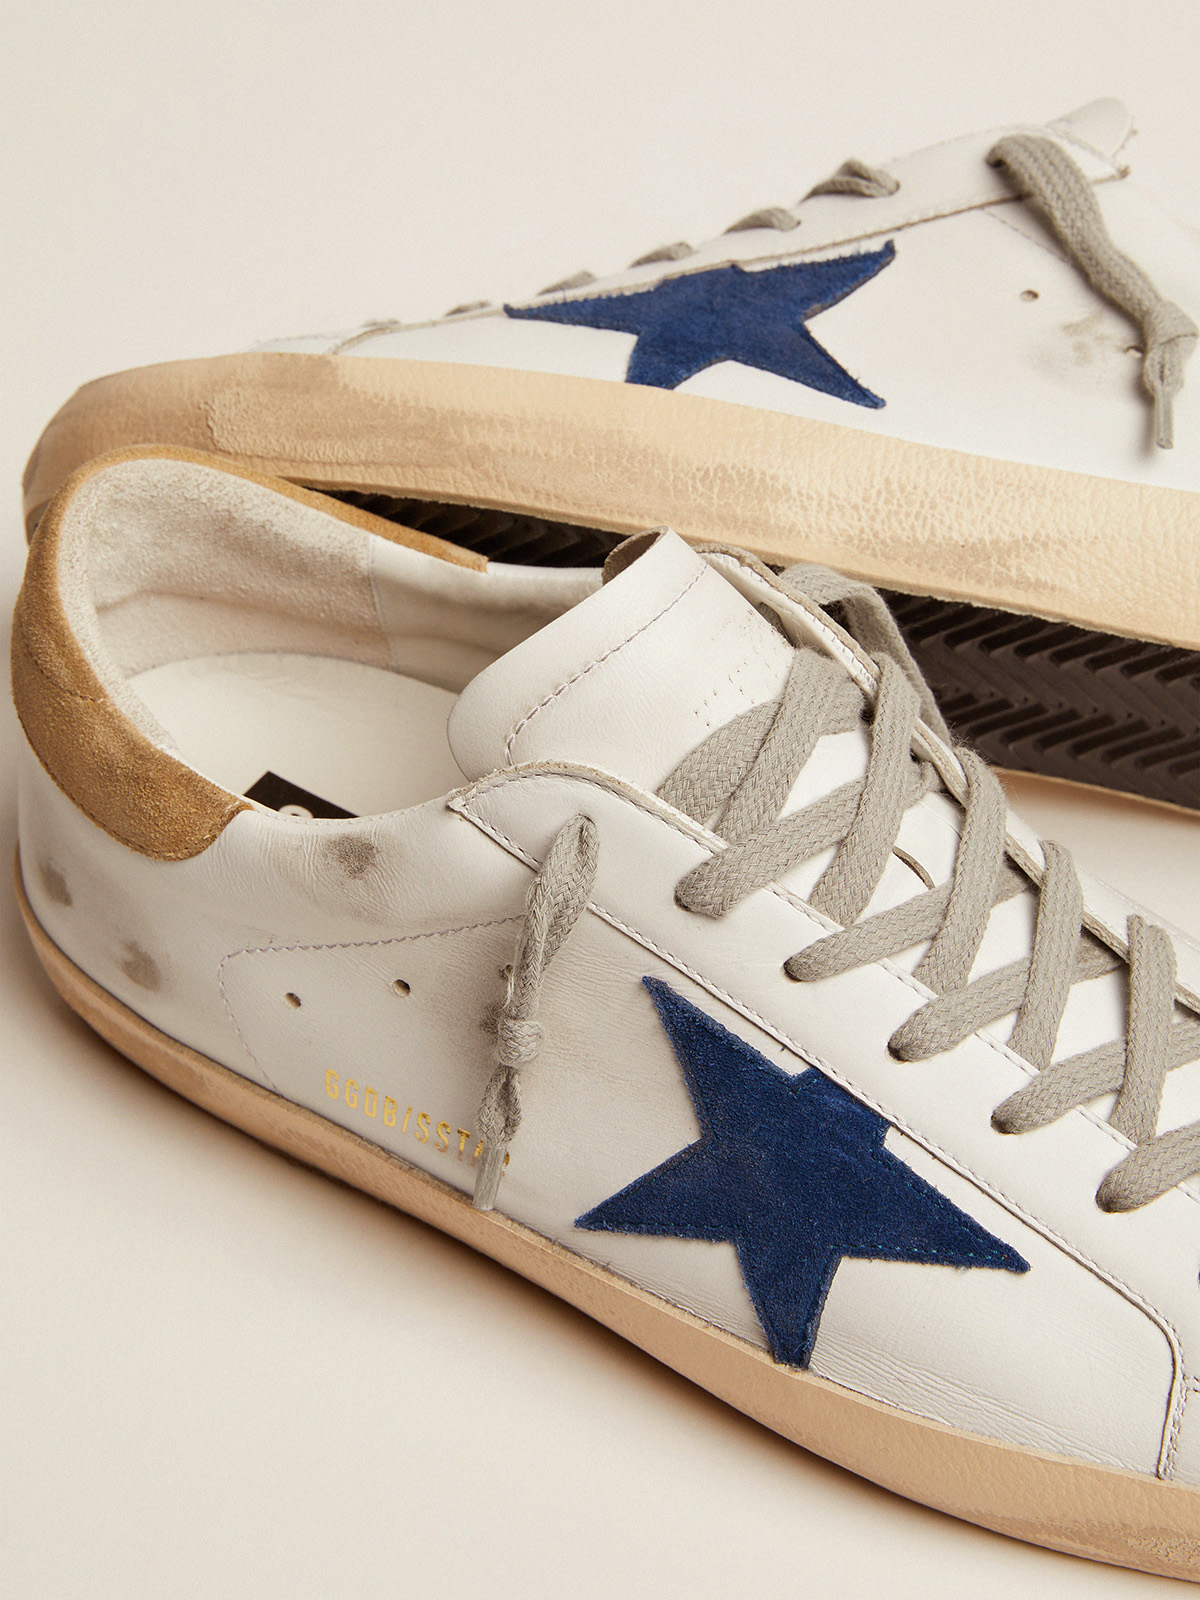 Super-Star sneakers with sand-colored suede heel tab and blue 